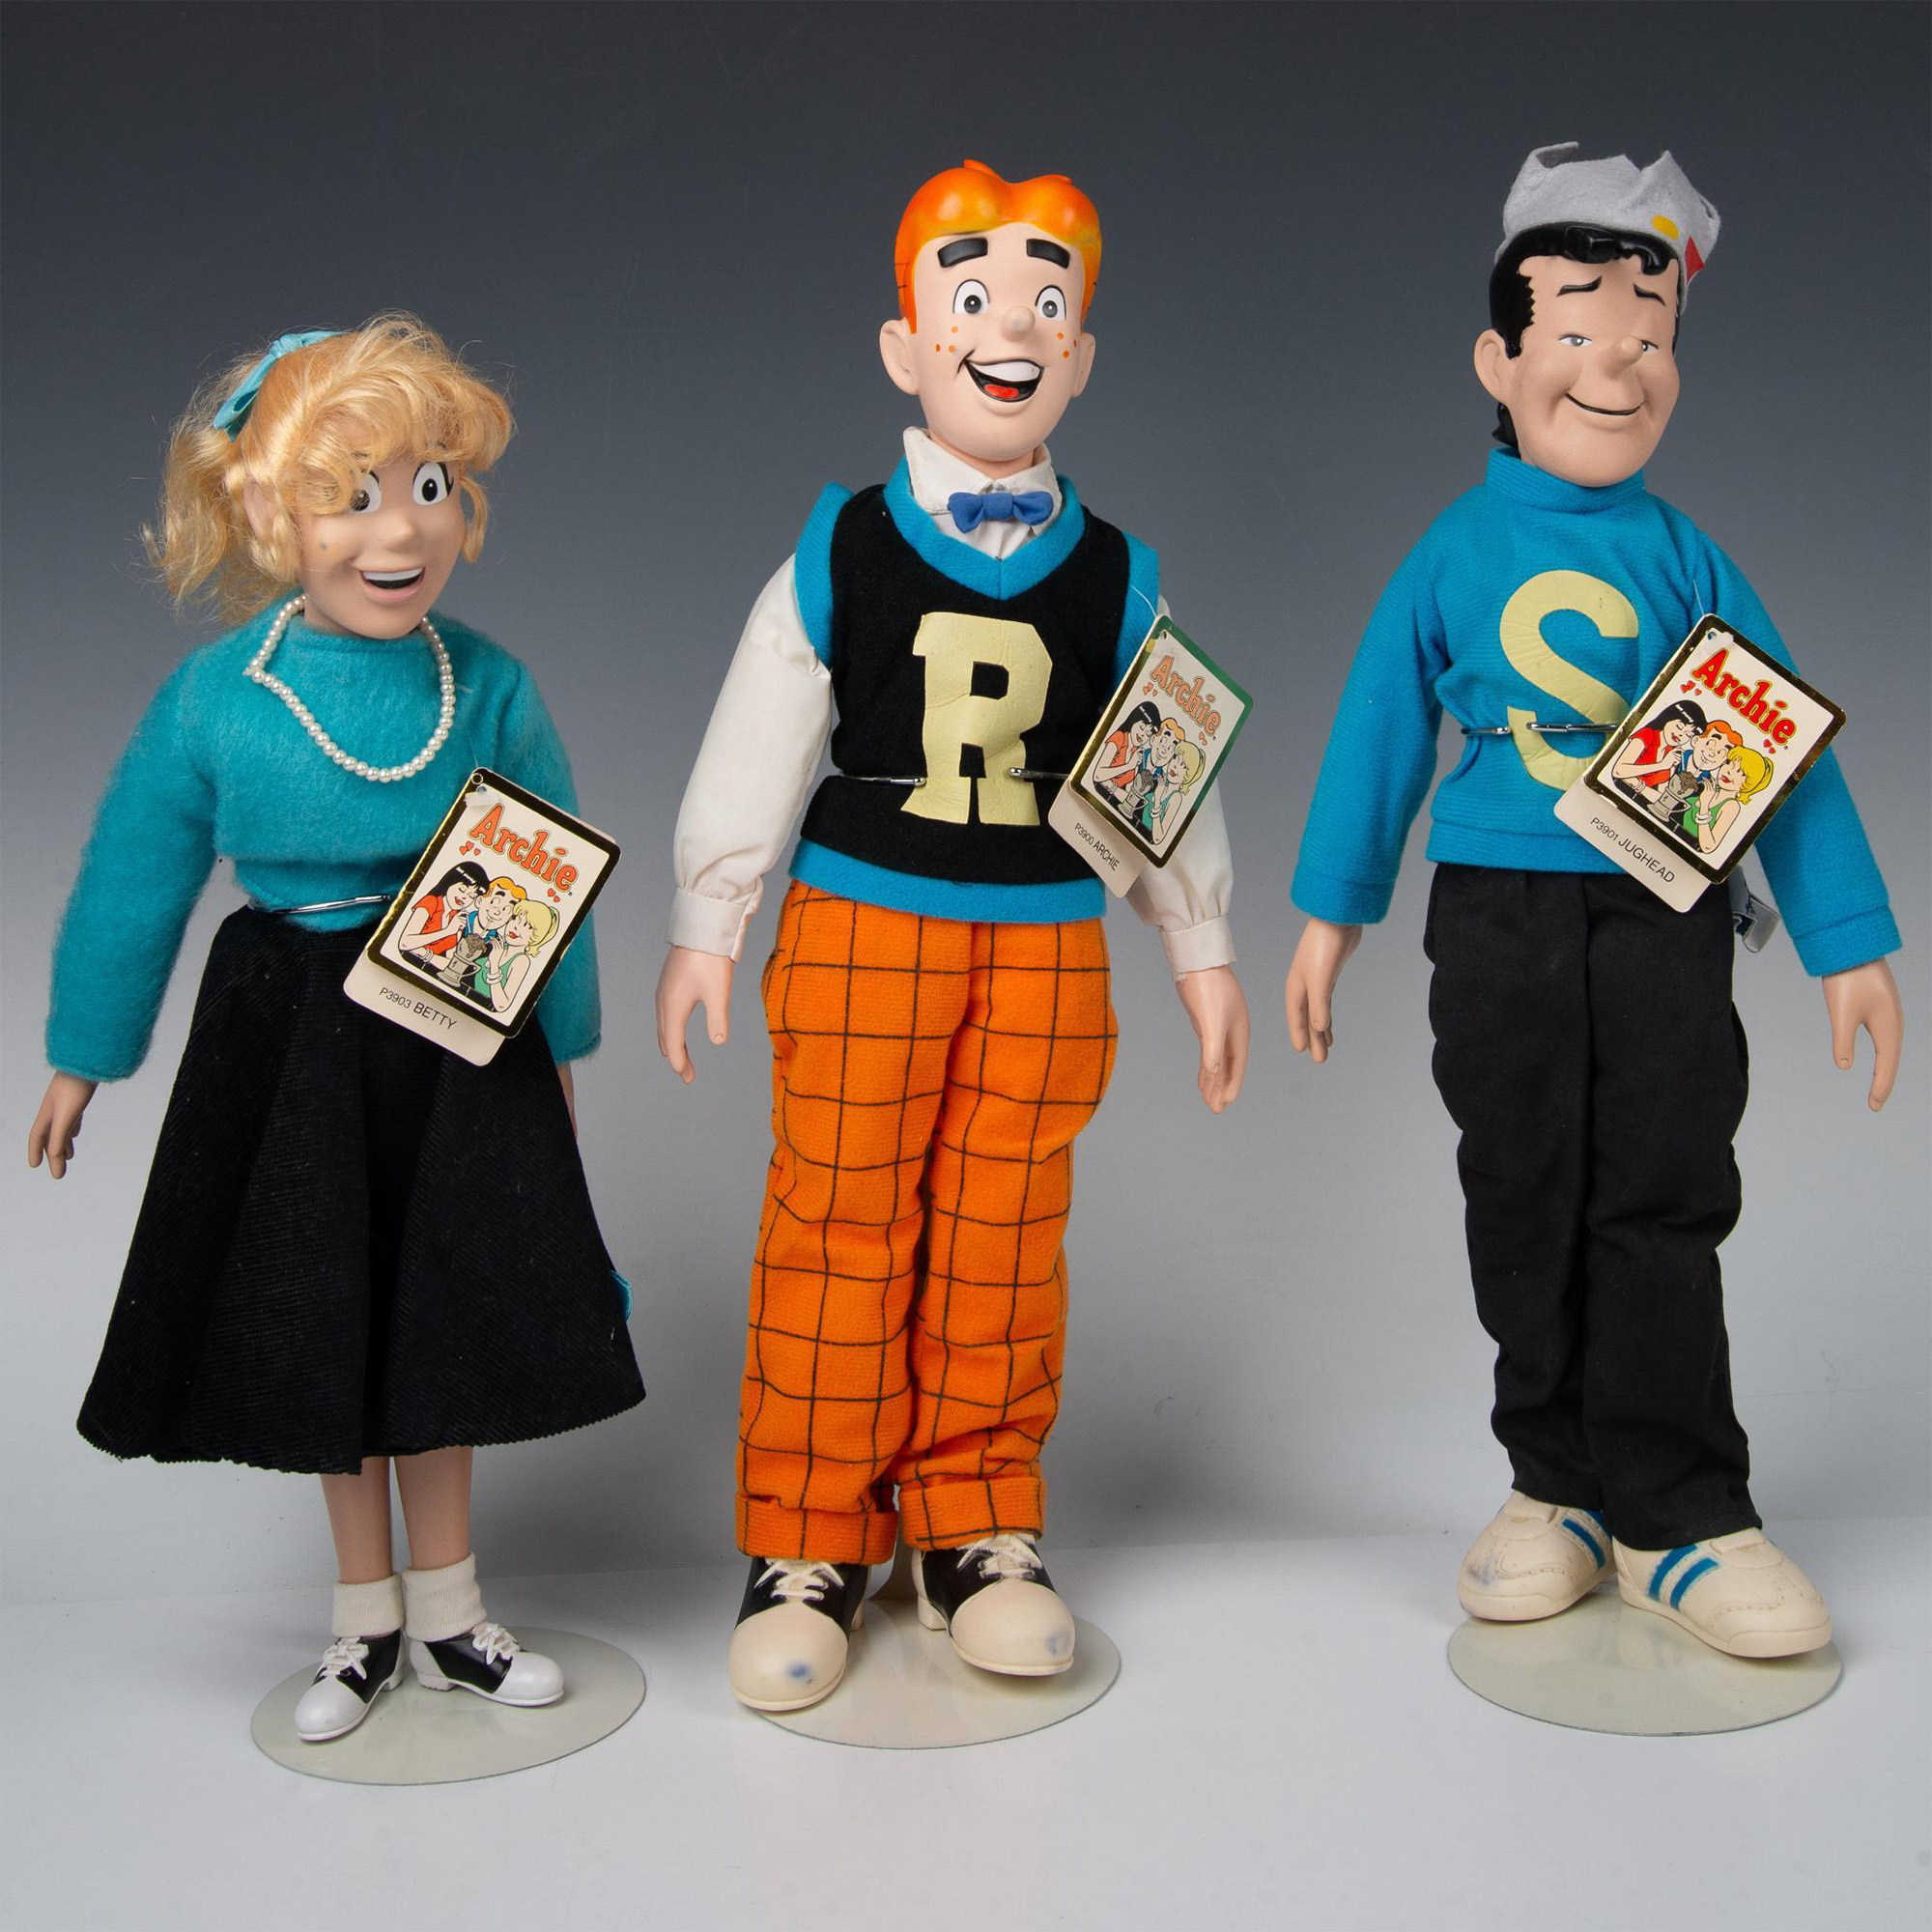 Hamilton Gifts Presents Doll Set, Archie Comics Characters